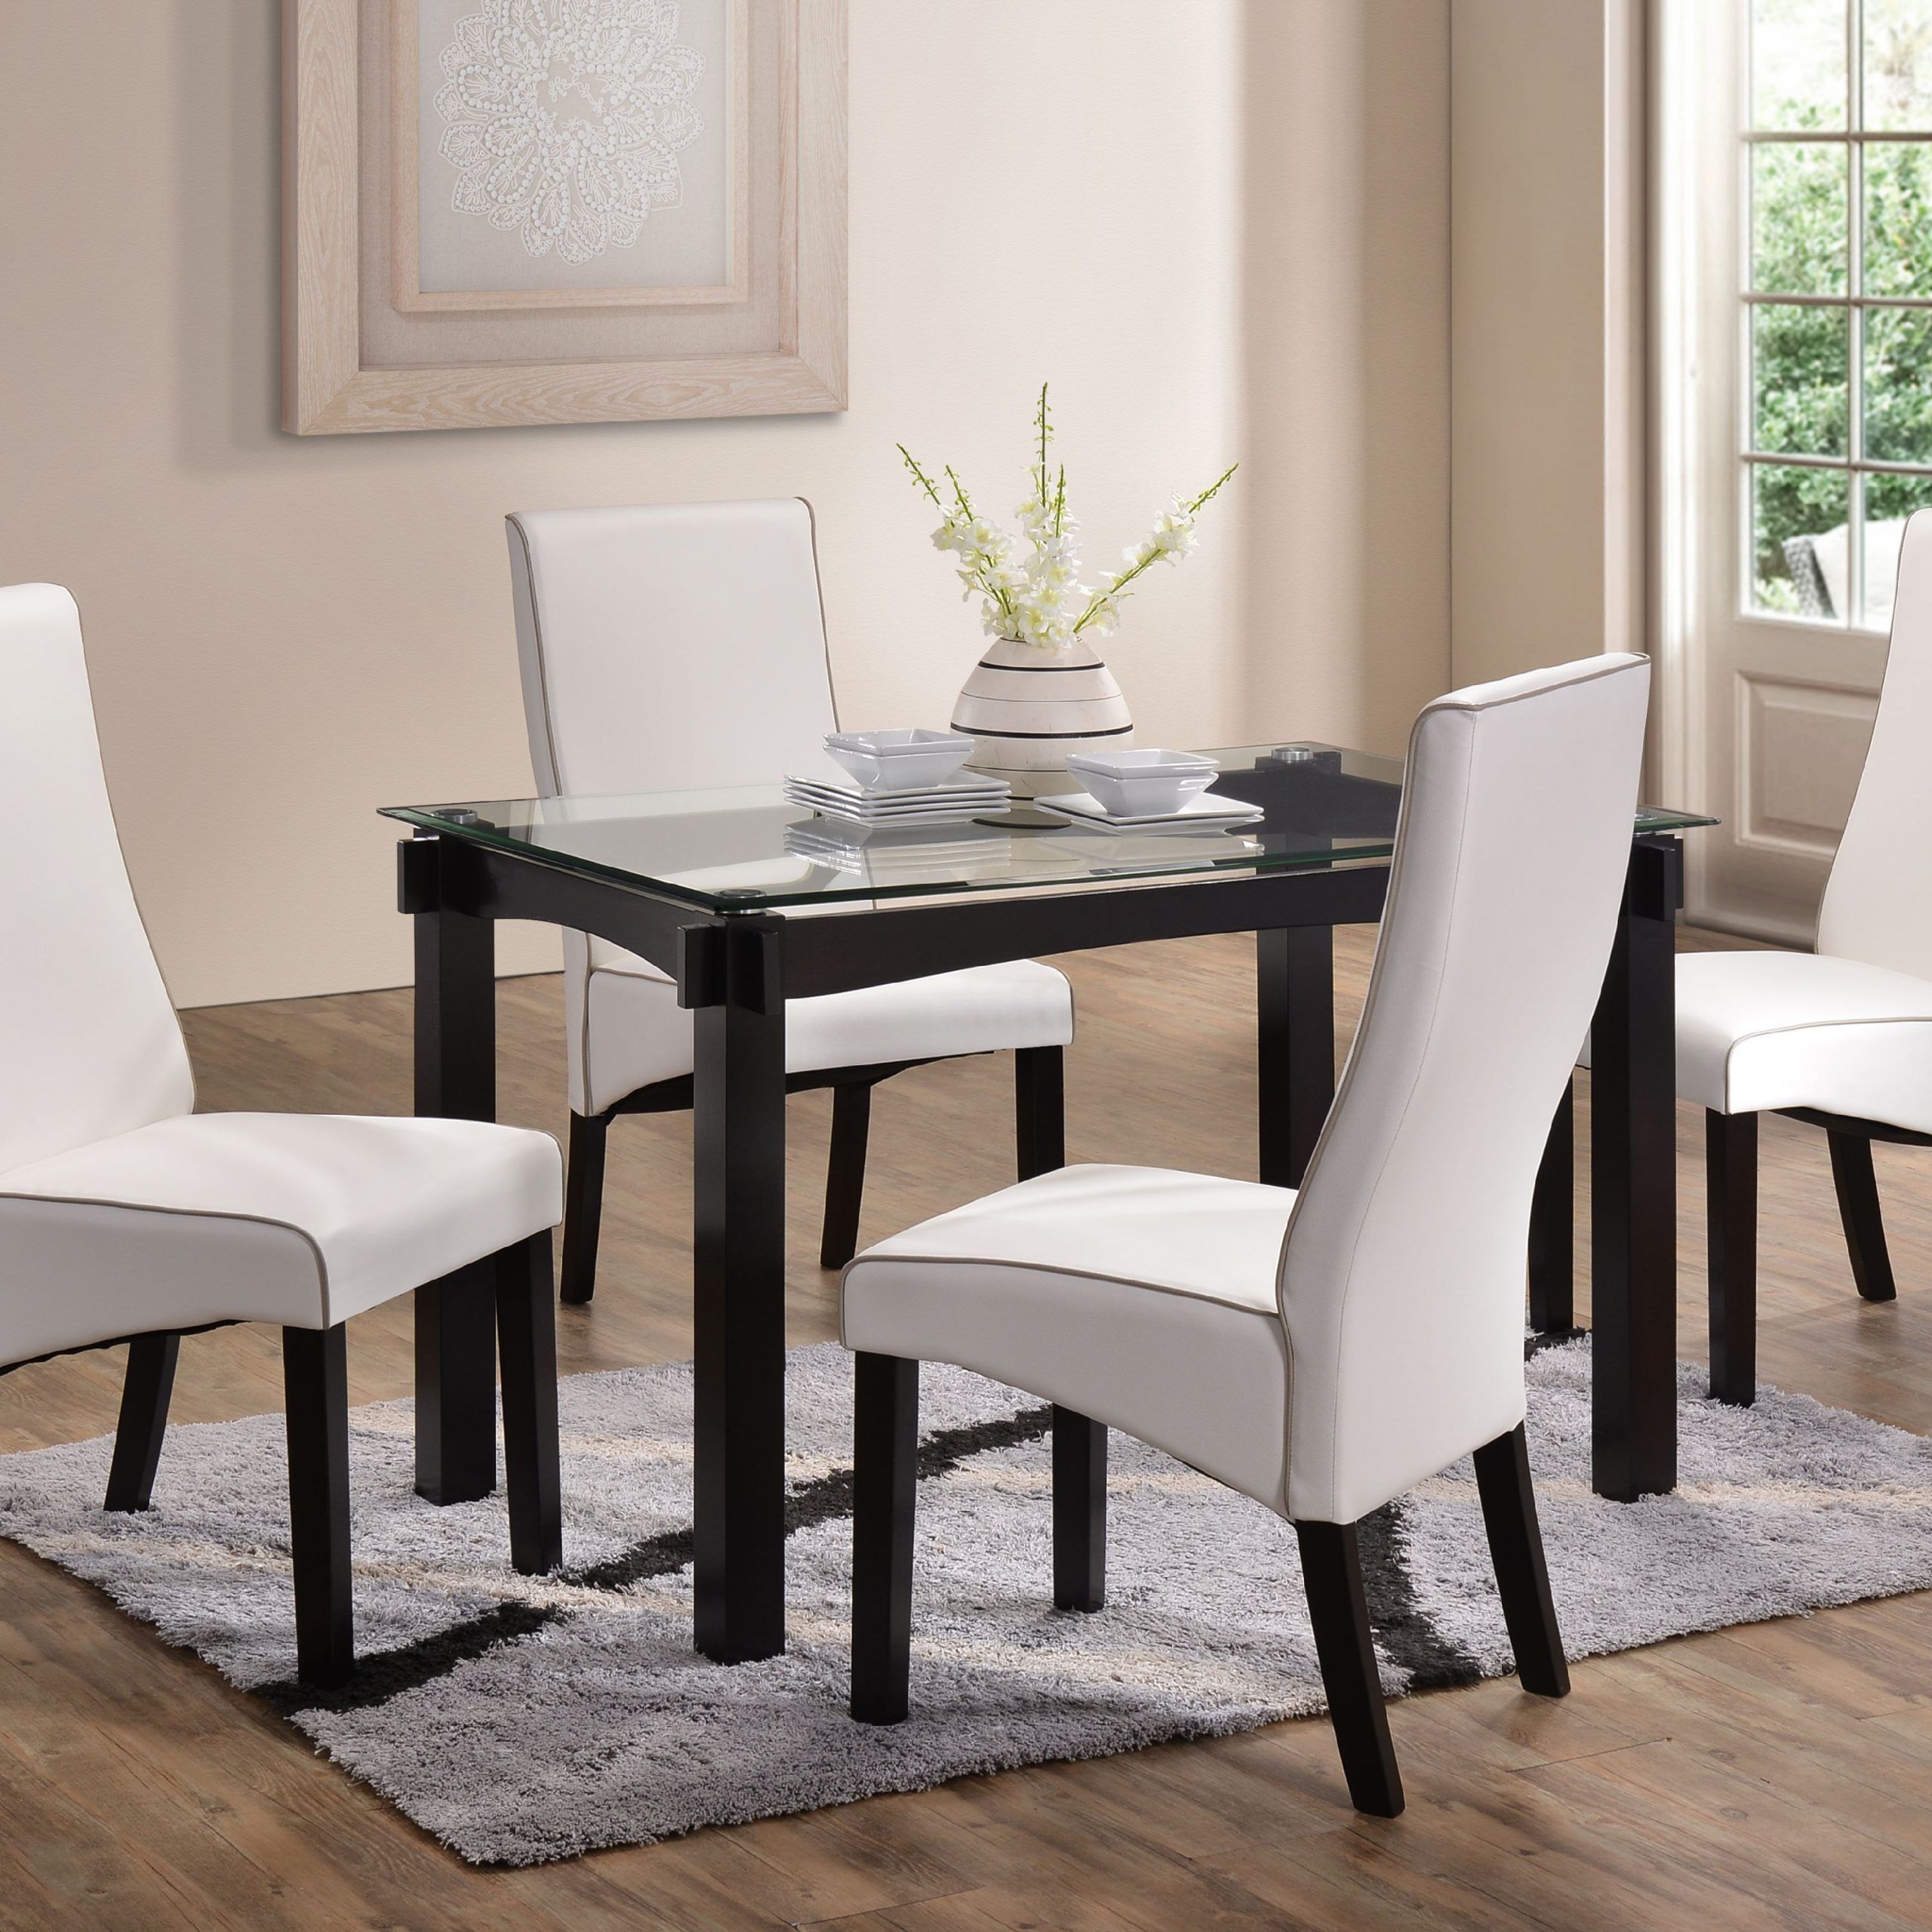 White Rectangular Dining Tables Throughout Most Recent Eugene 5 Piece Dining Set, 47" Rectangular, Transitional (View 5 of 20)